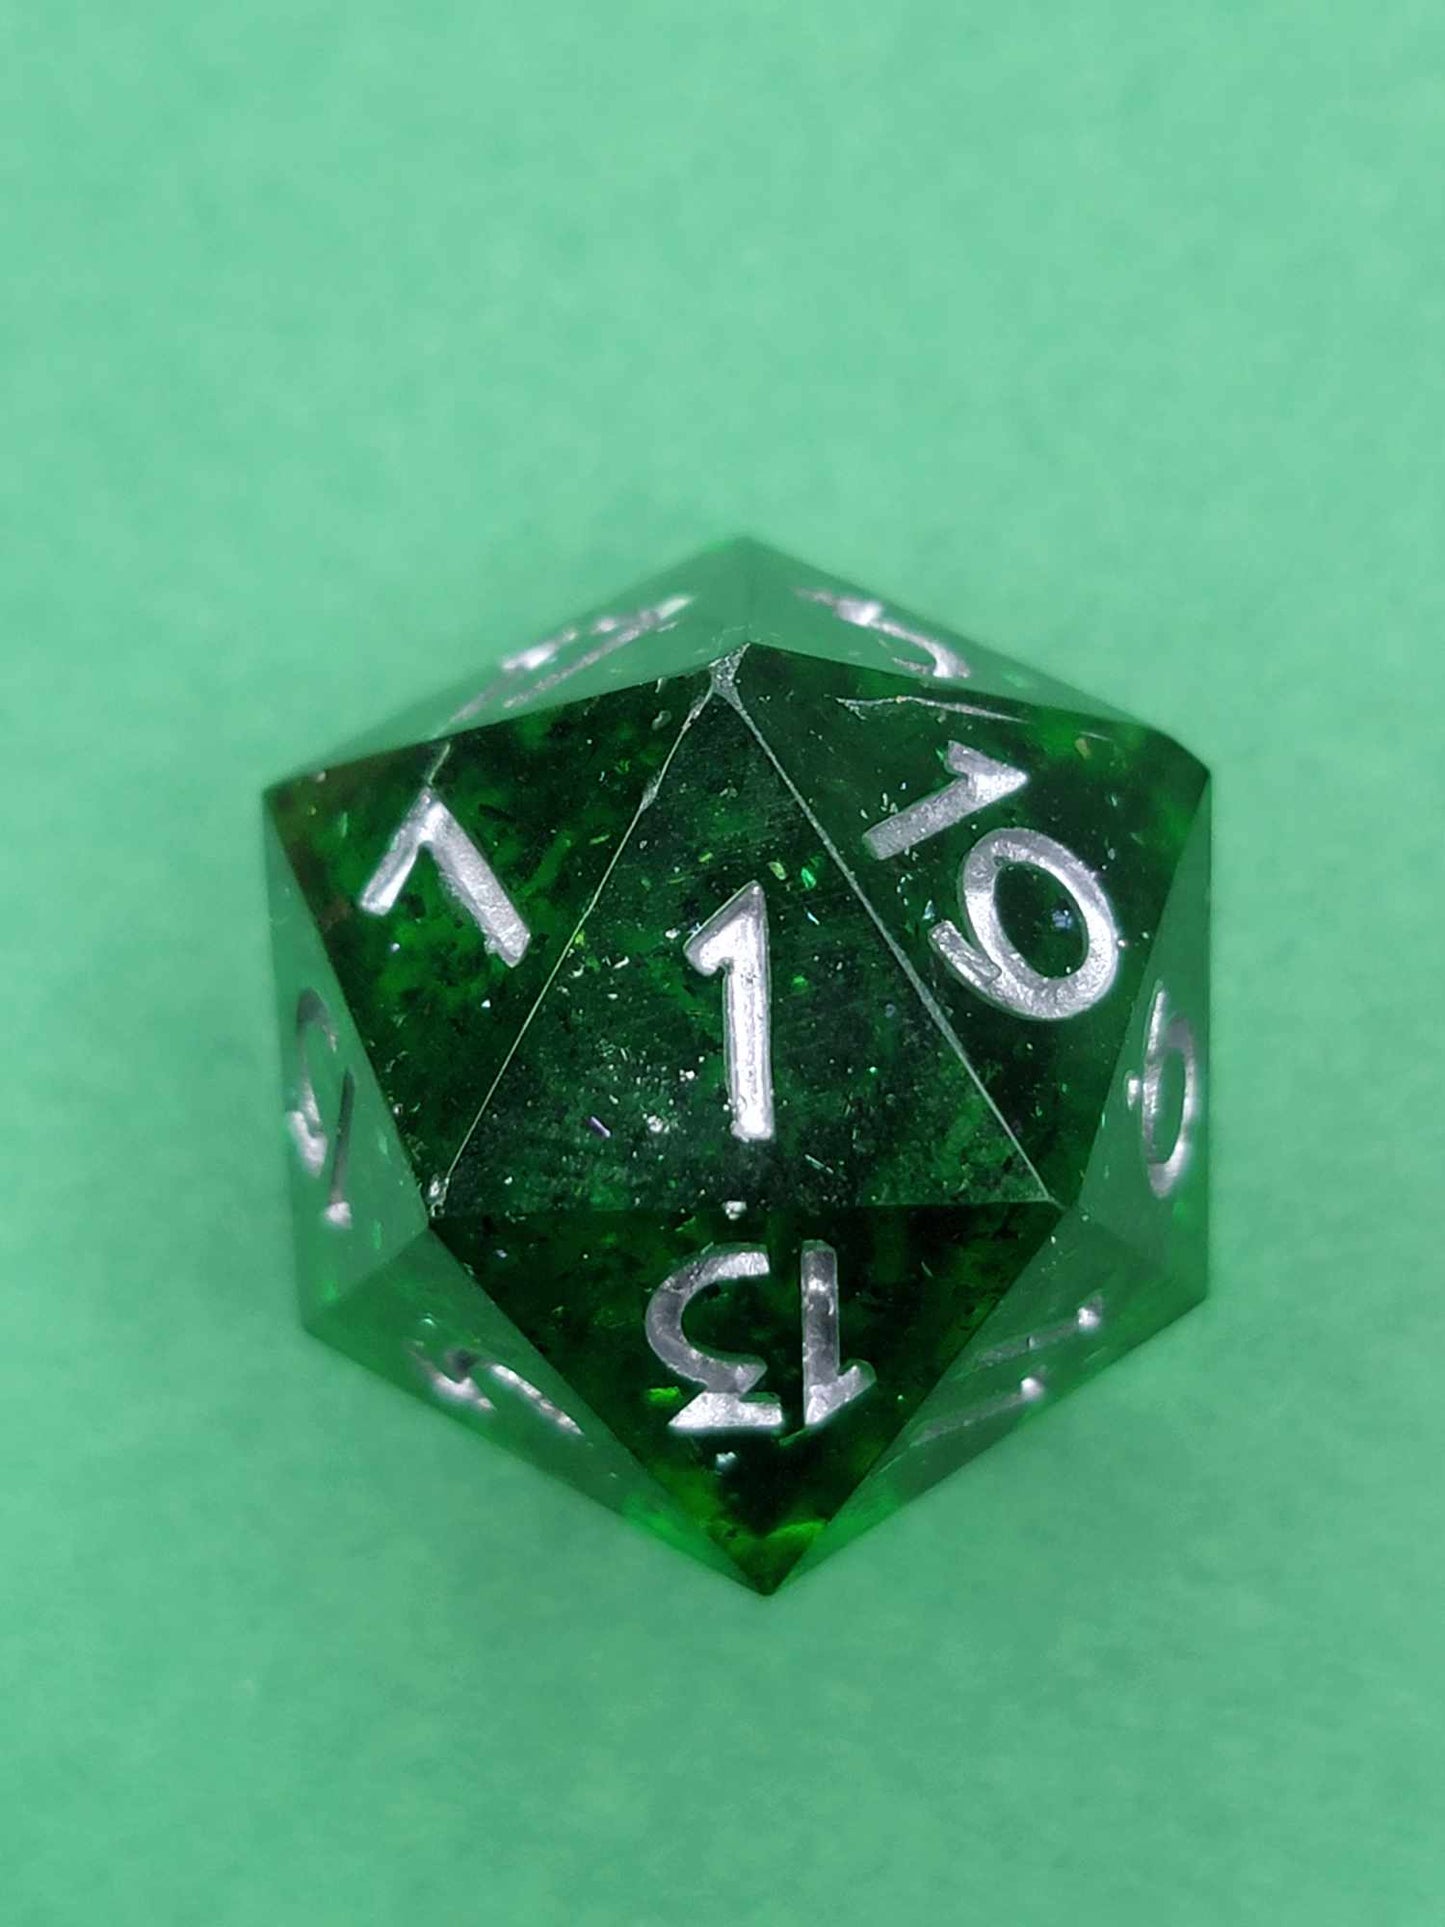 Deep in the Fores - Single D20 D&D Dice| Hand Crafted Dungeons and Dragons Dice